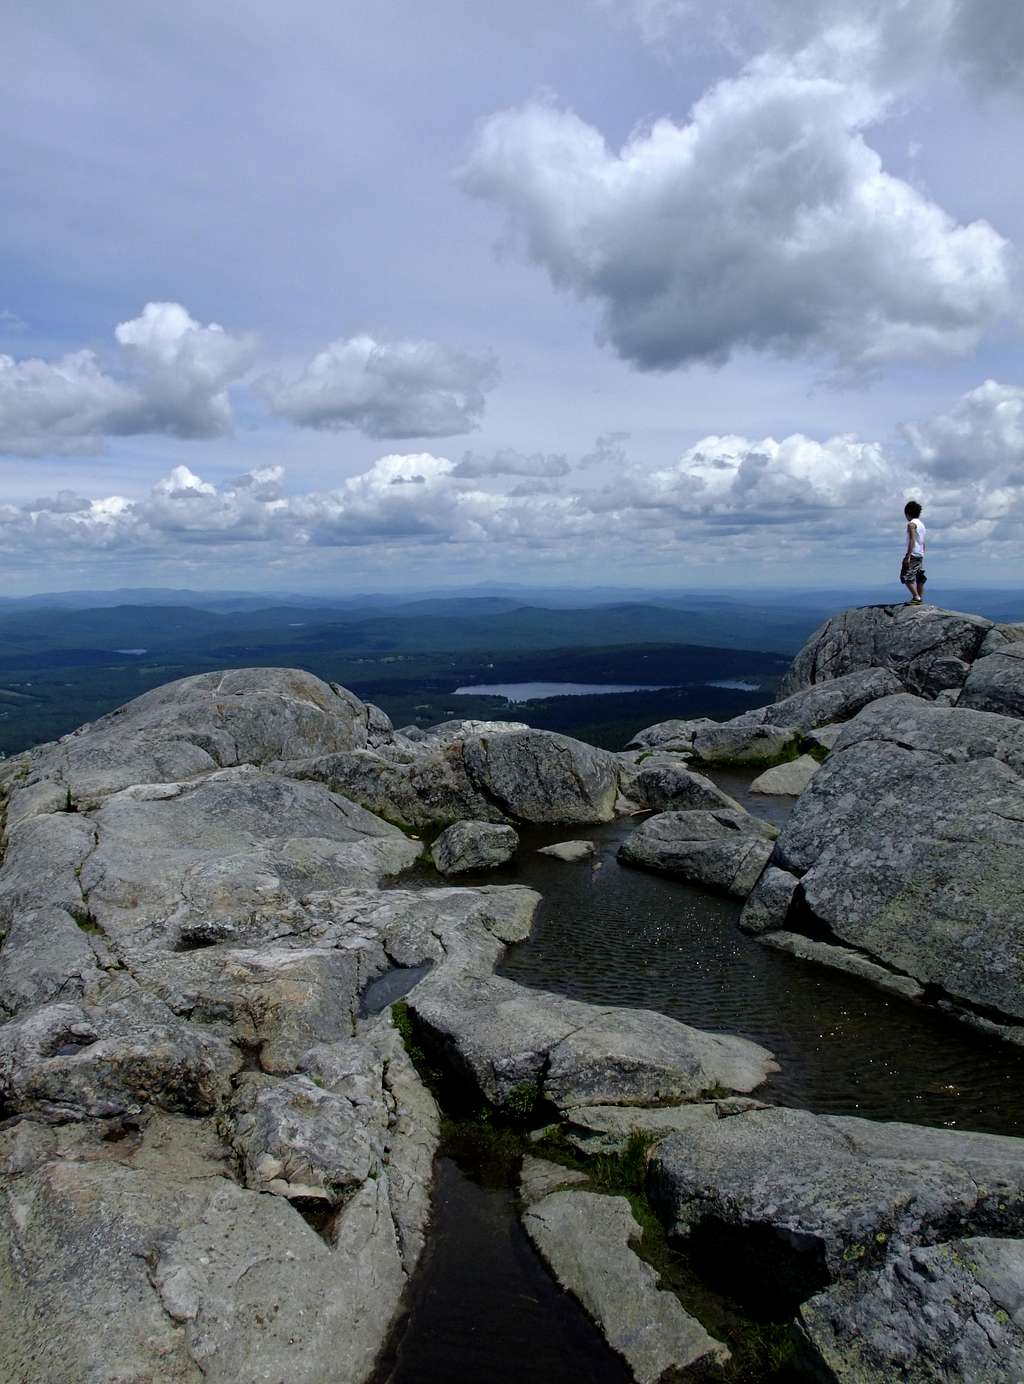 Taking in the View on Monadnock